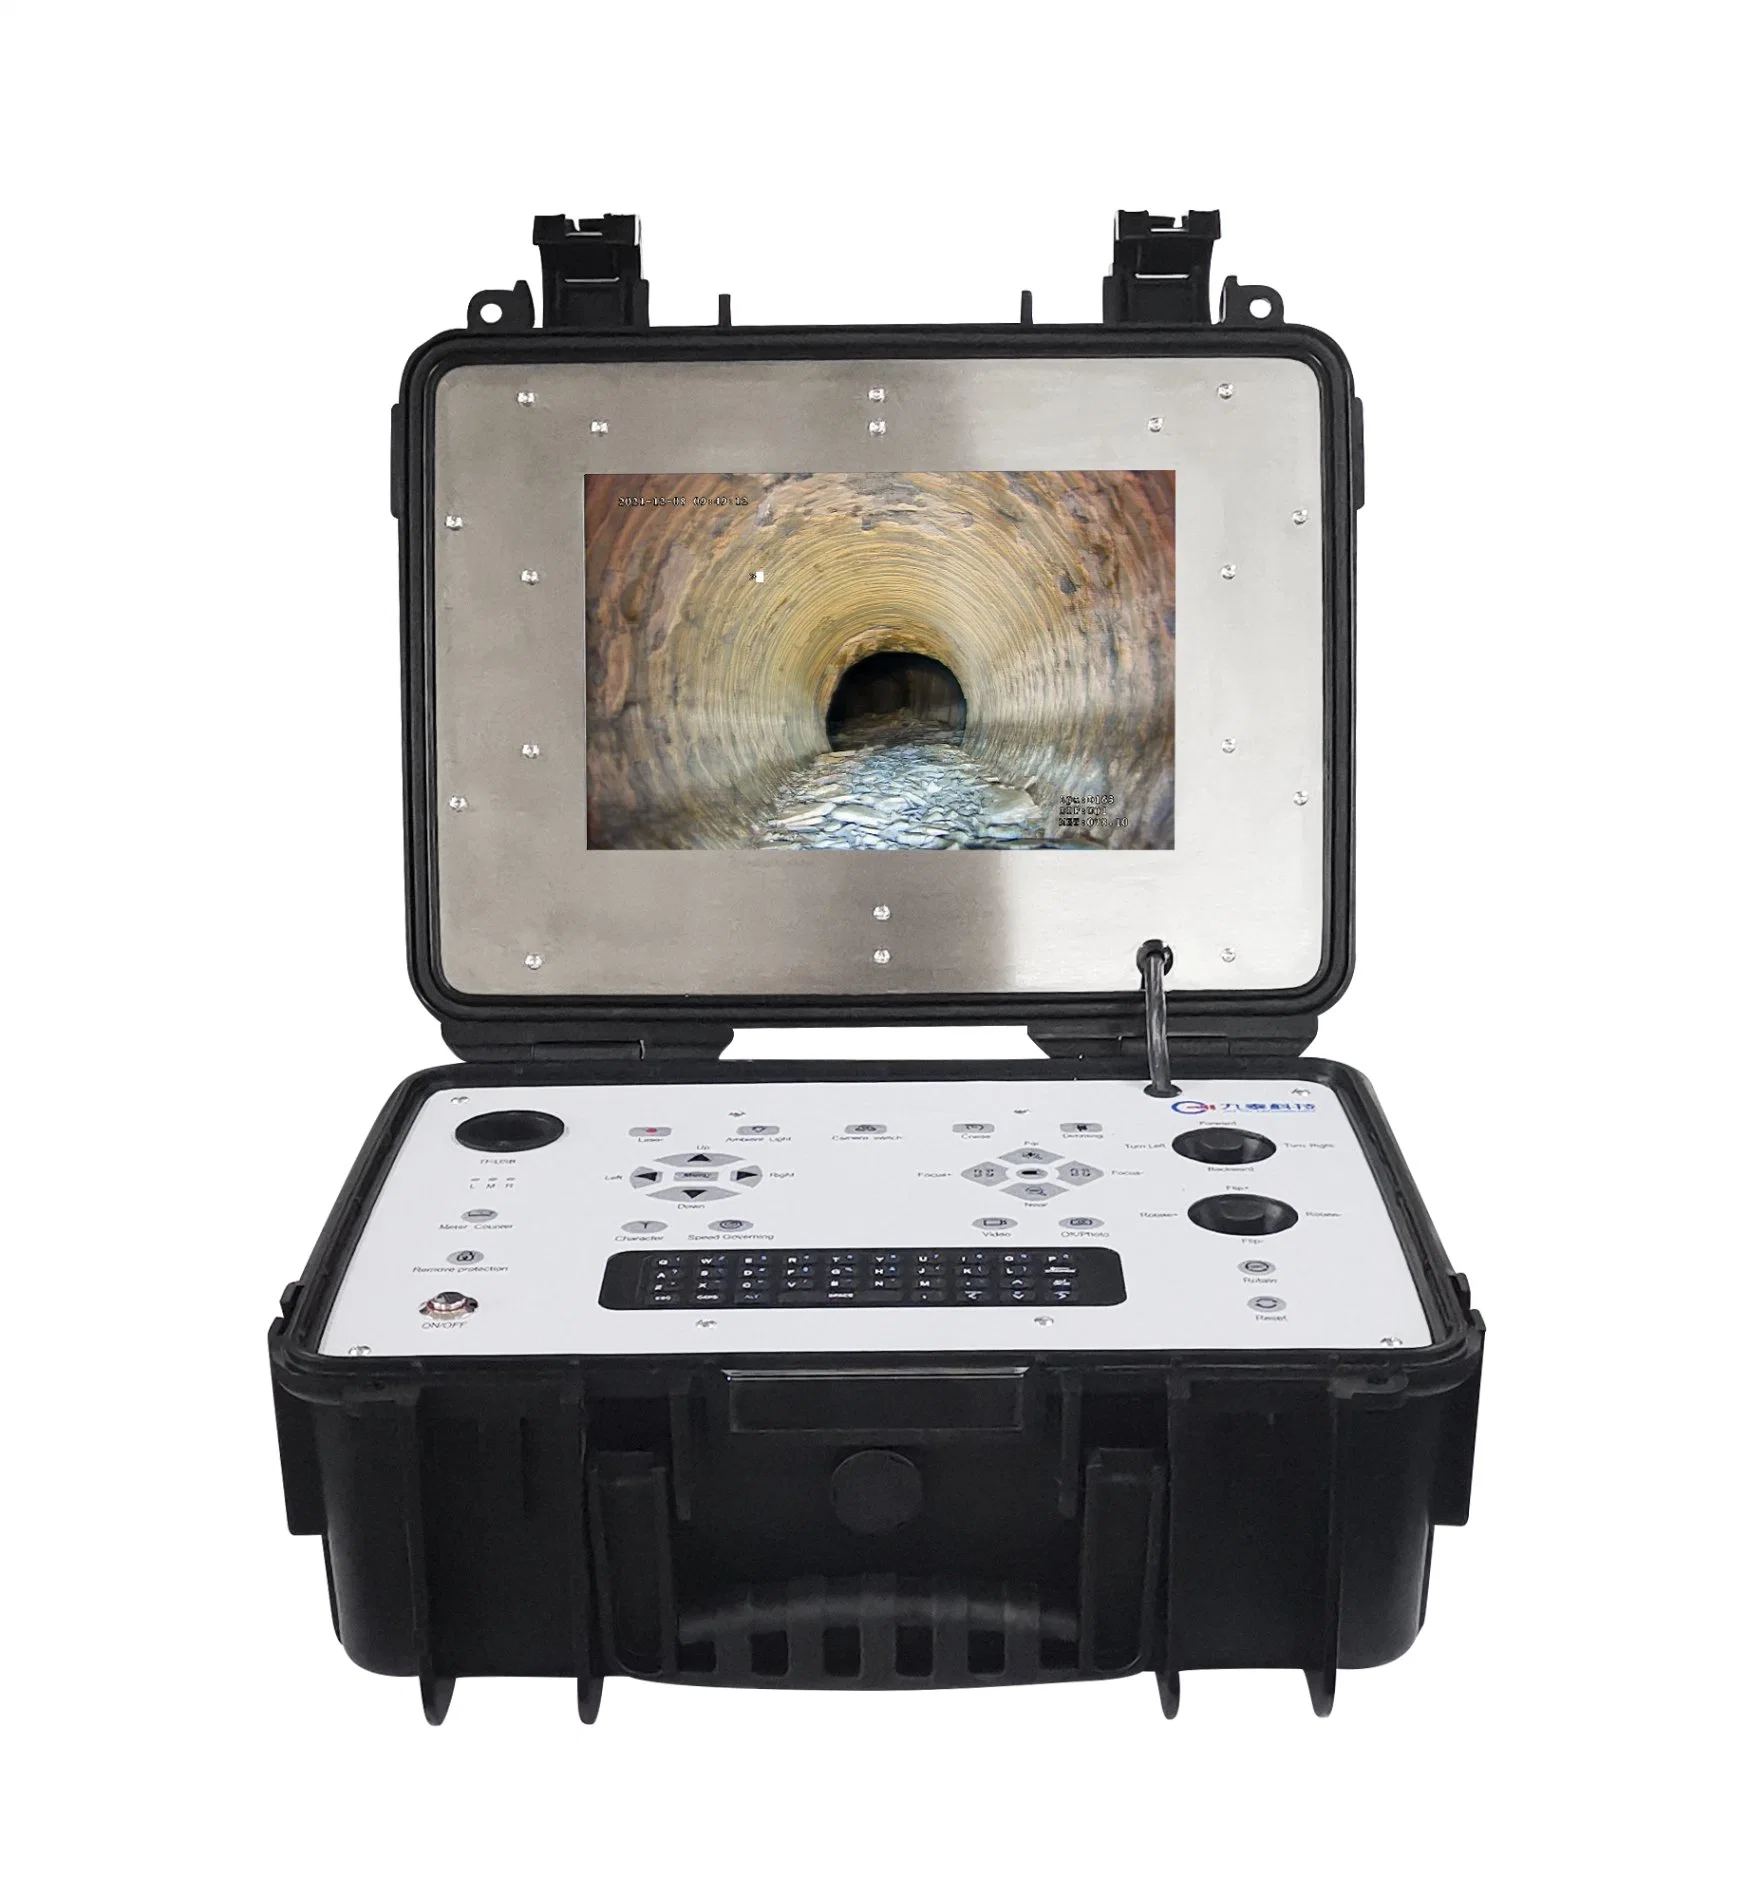 Sewerage Pipeline Inspection Camera with 360 Degree Rotate Lifting Camera